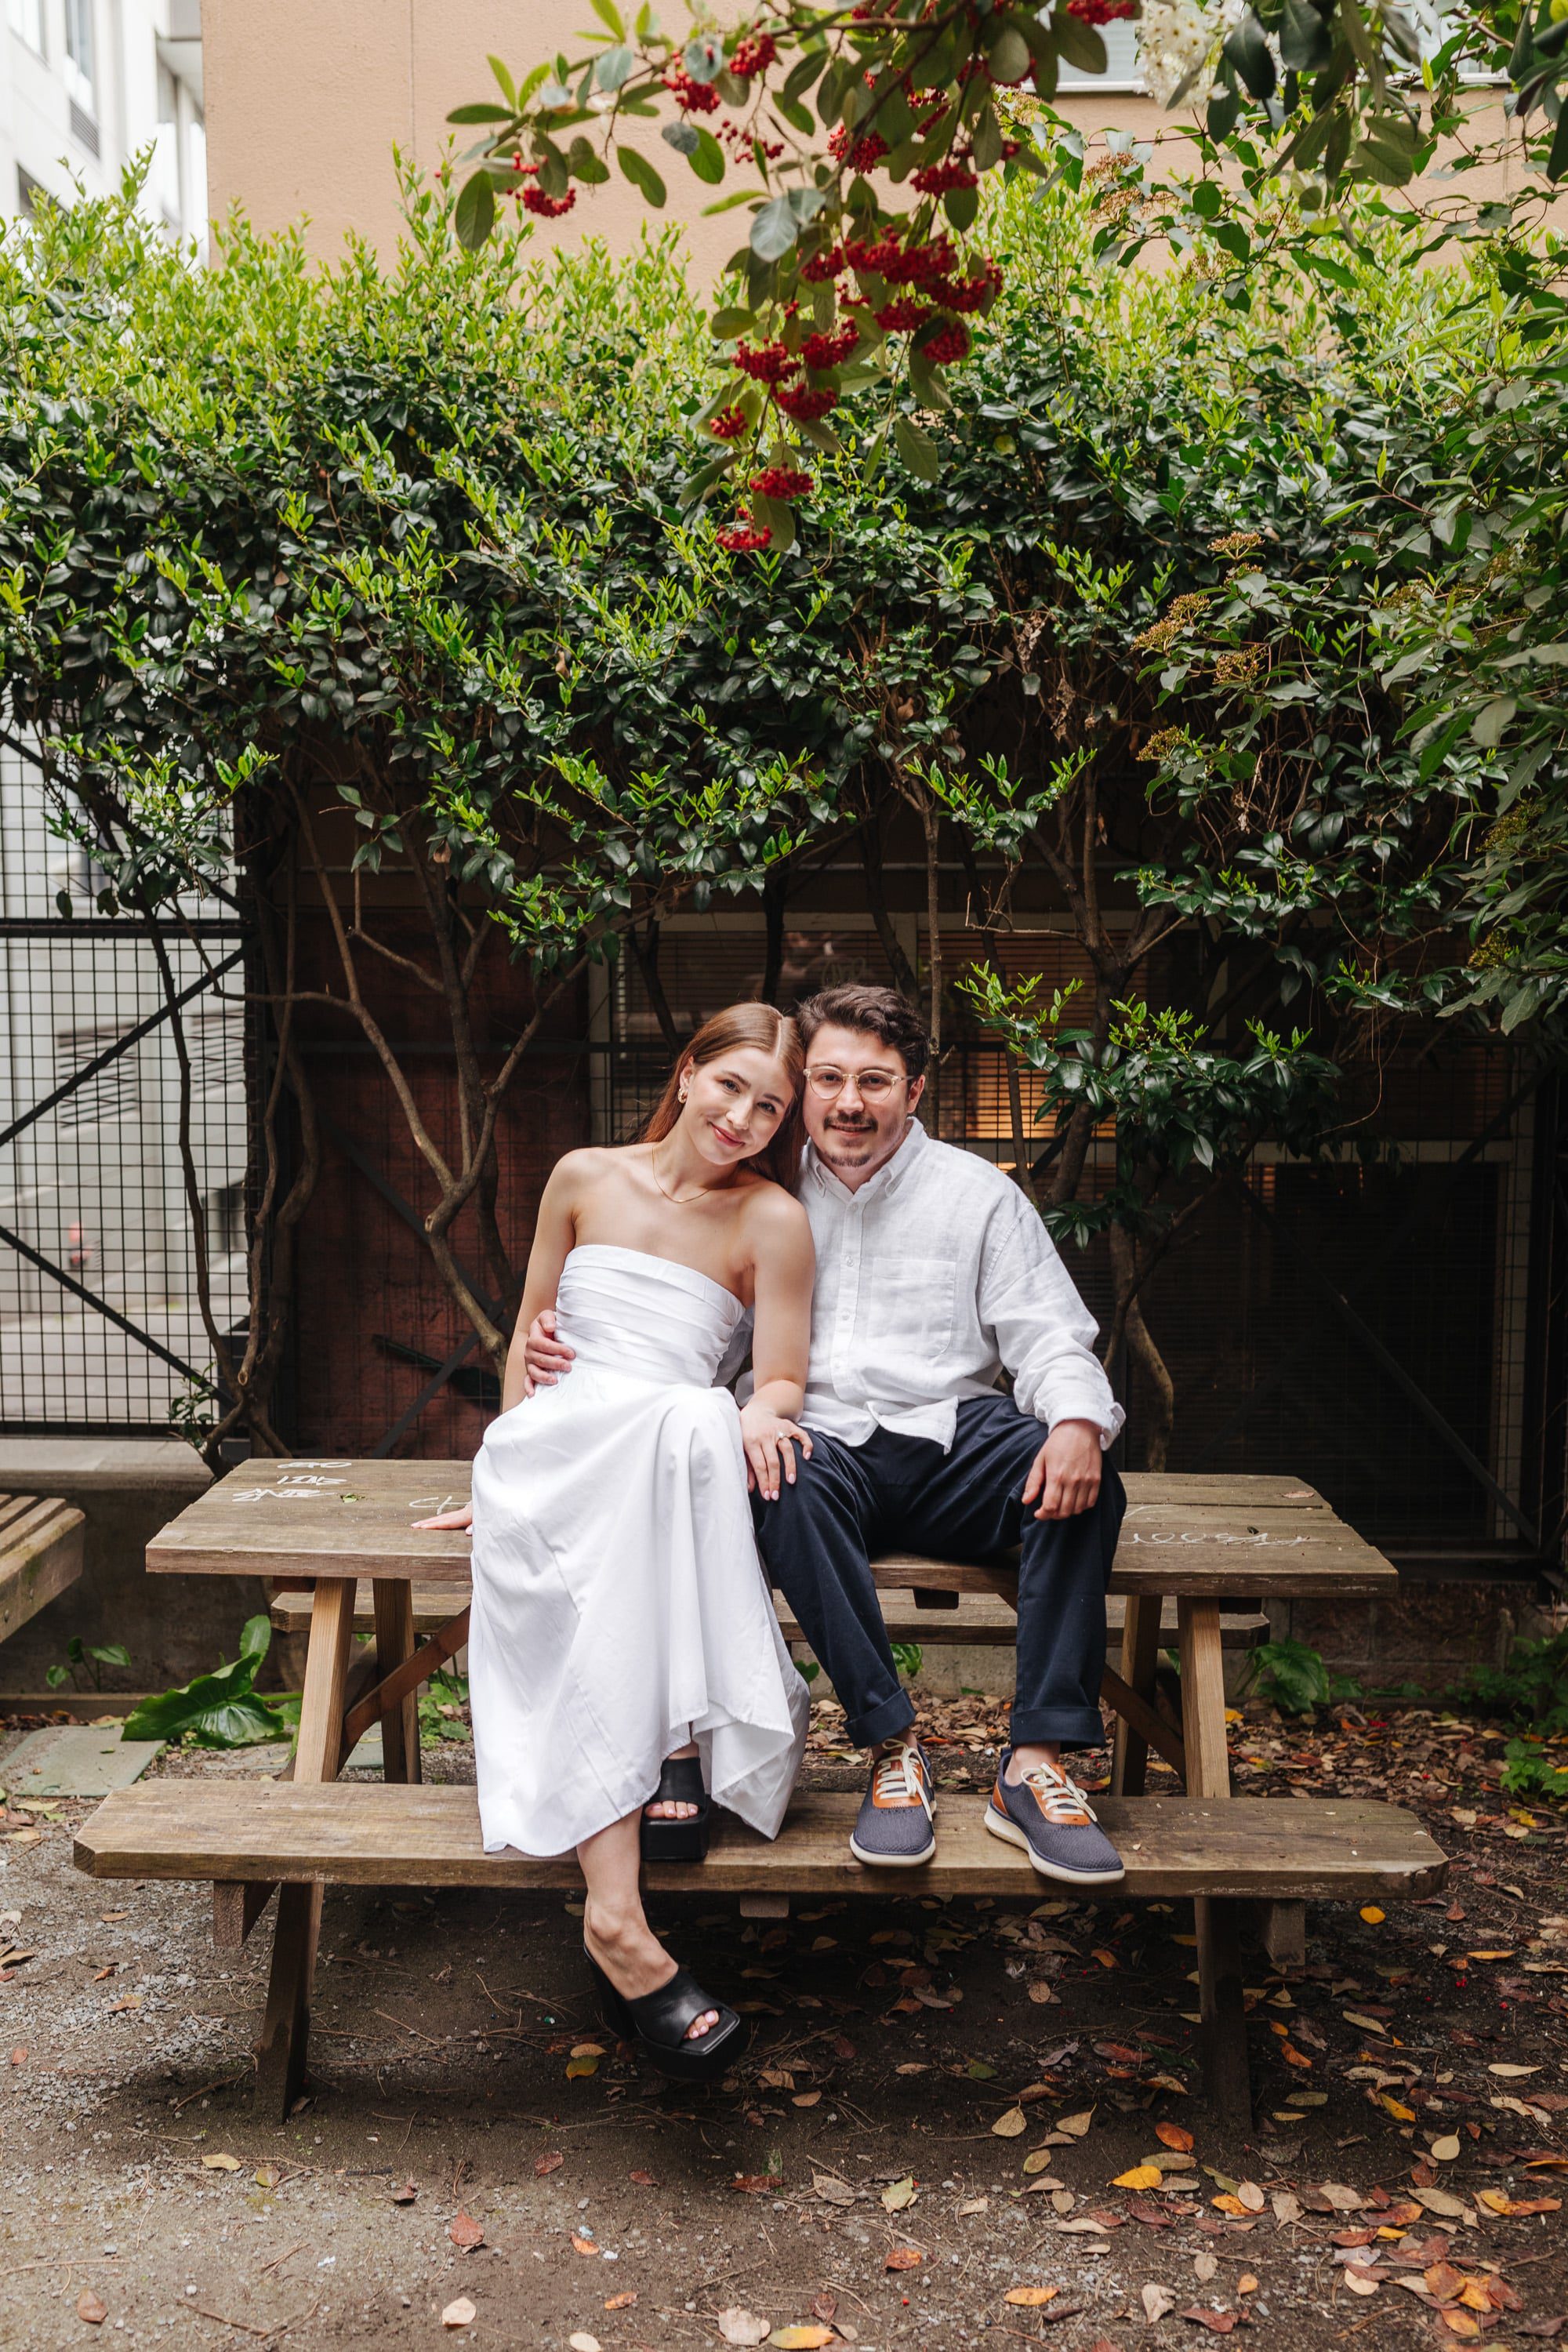 white engagement outfit ideas, engagement photo ideas, engagement photo posing ideas, white engagement outfit ideas, sitting posing ideas, engagement sitting pose